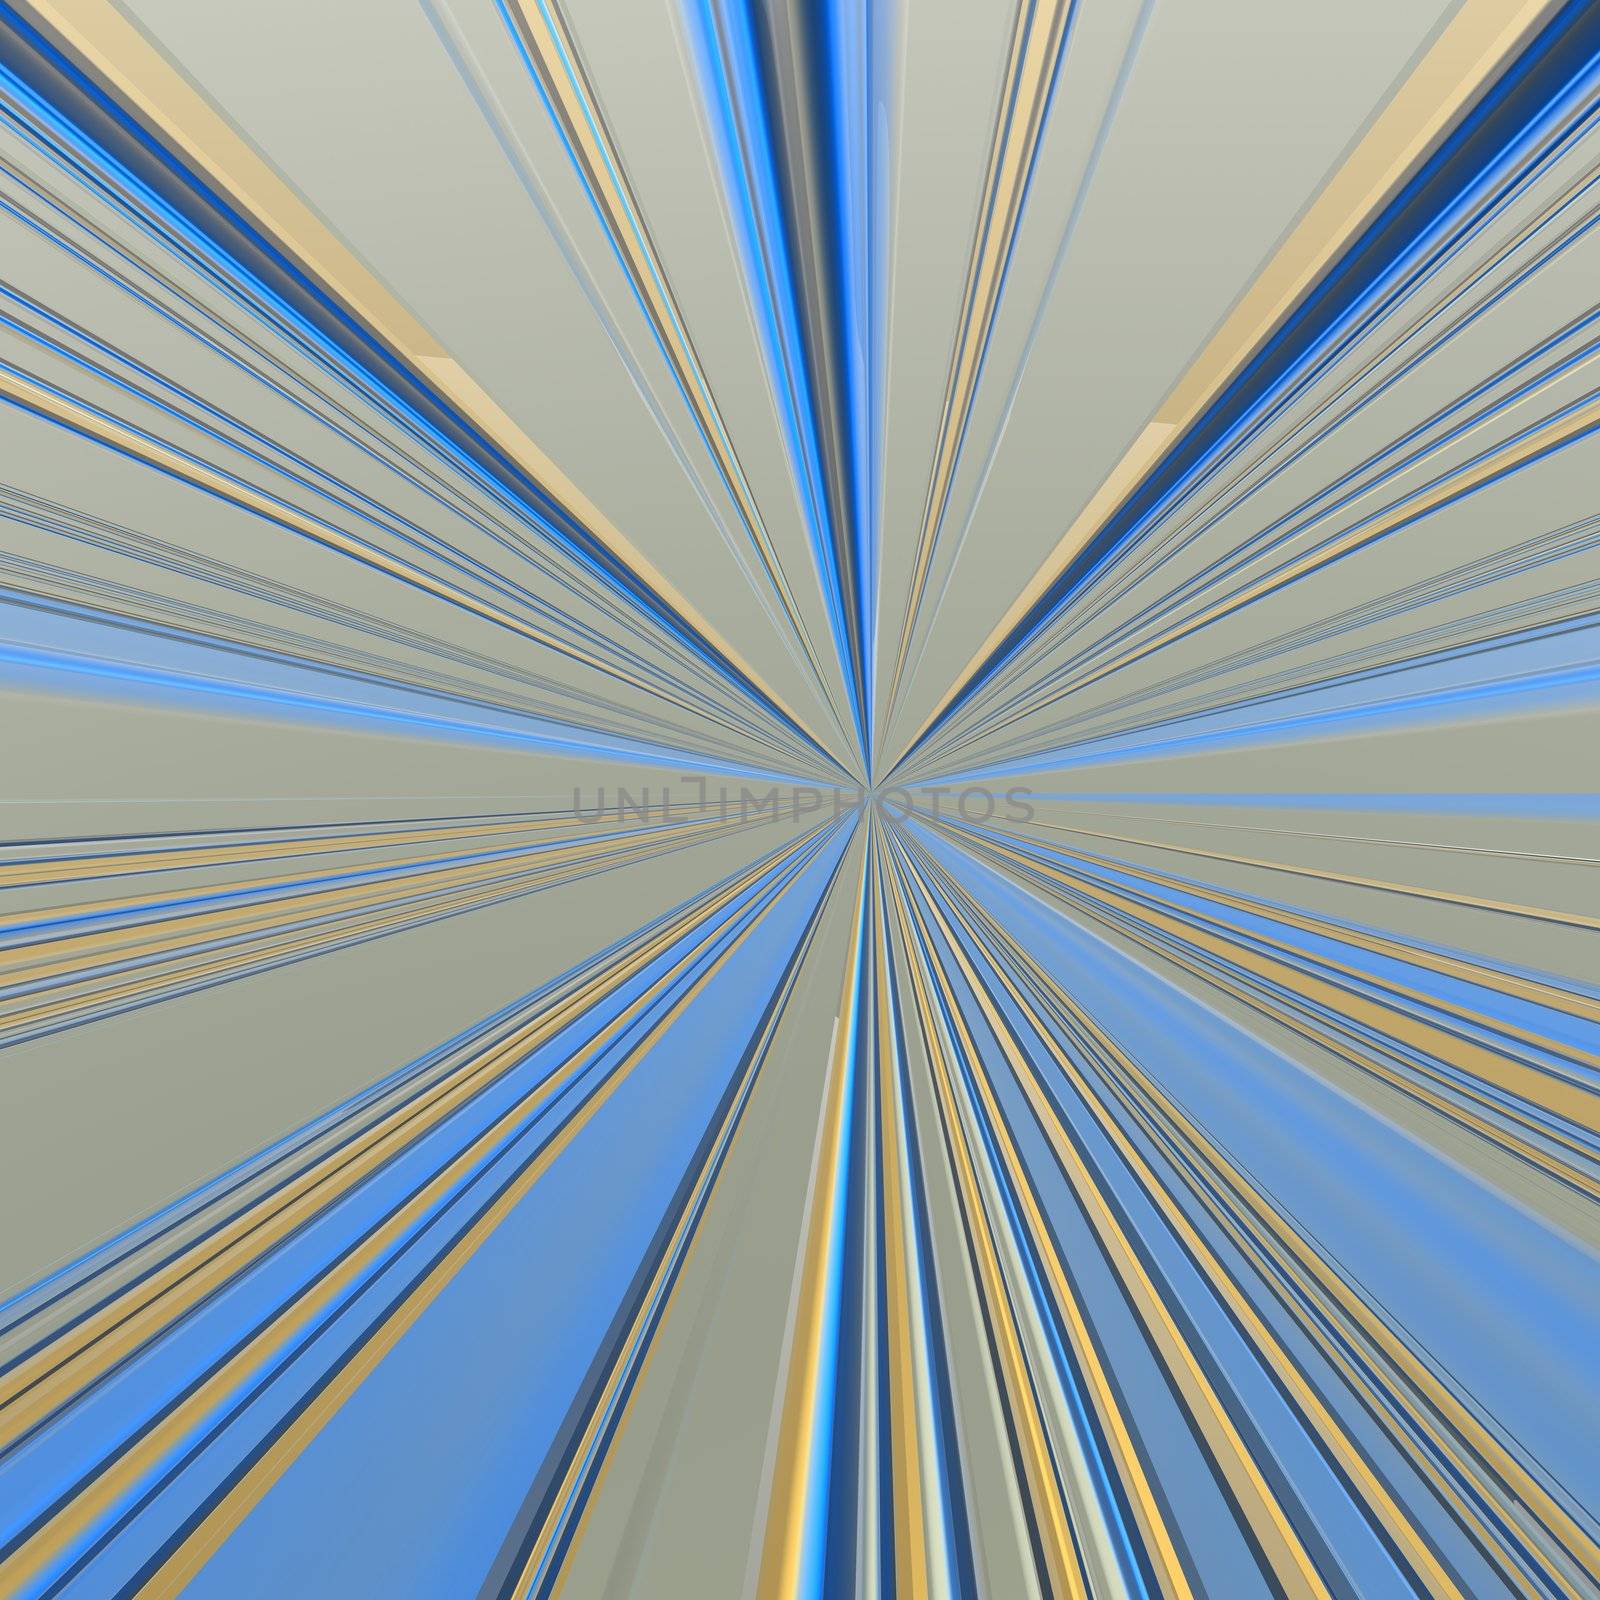 Grey, blue and yellow rays to center as background